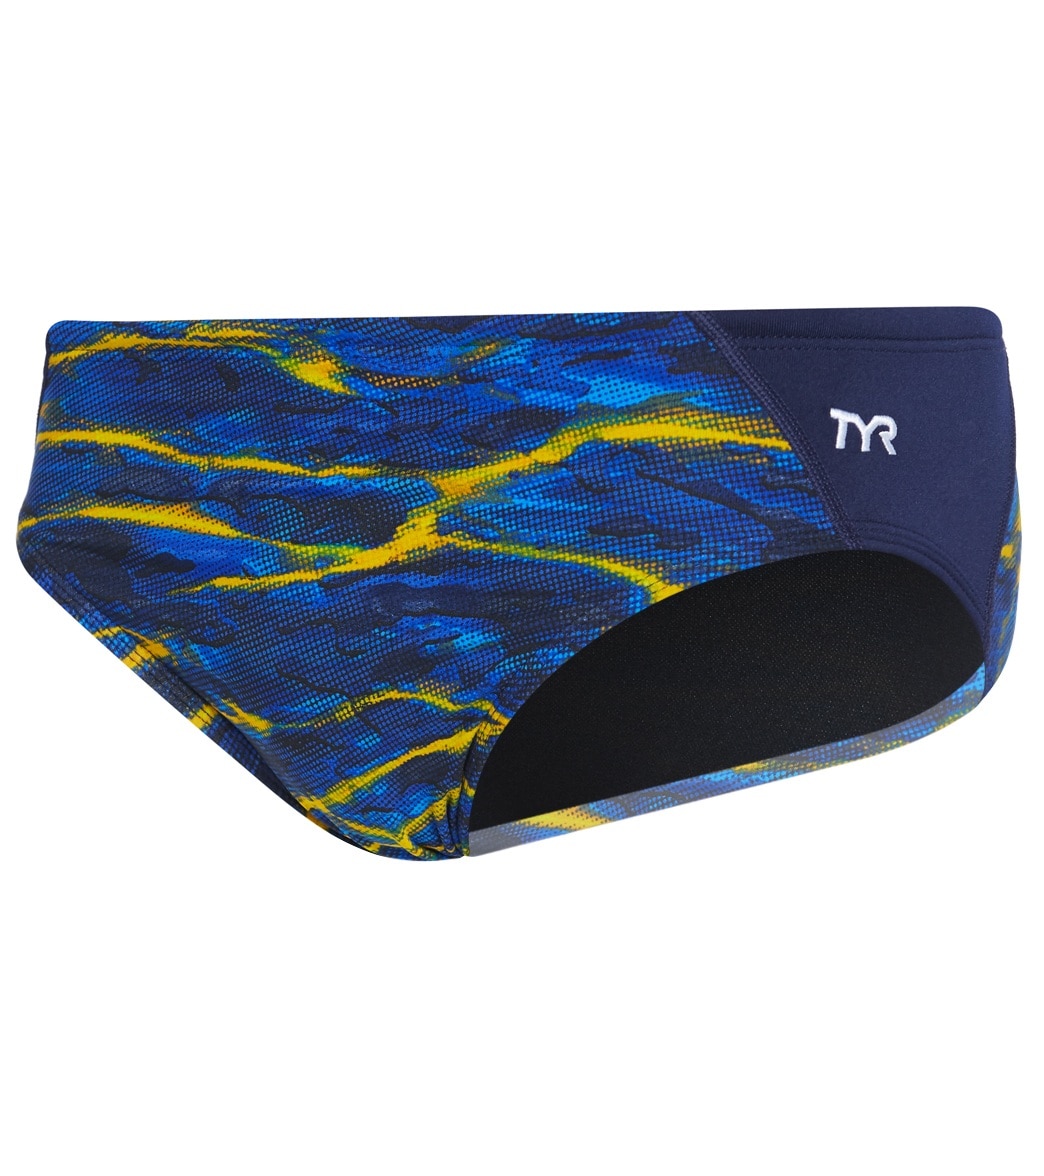 TYR Men's Lambent Blade Racer Brief Swimsuit - Navy/Gold 26 Polyester/Spandex - Swimoutlet.com